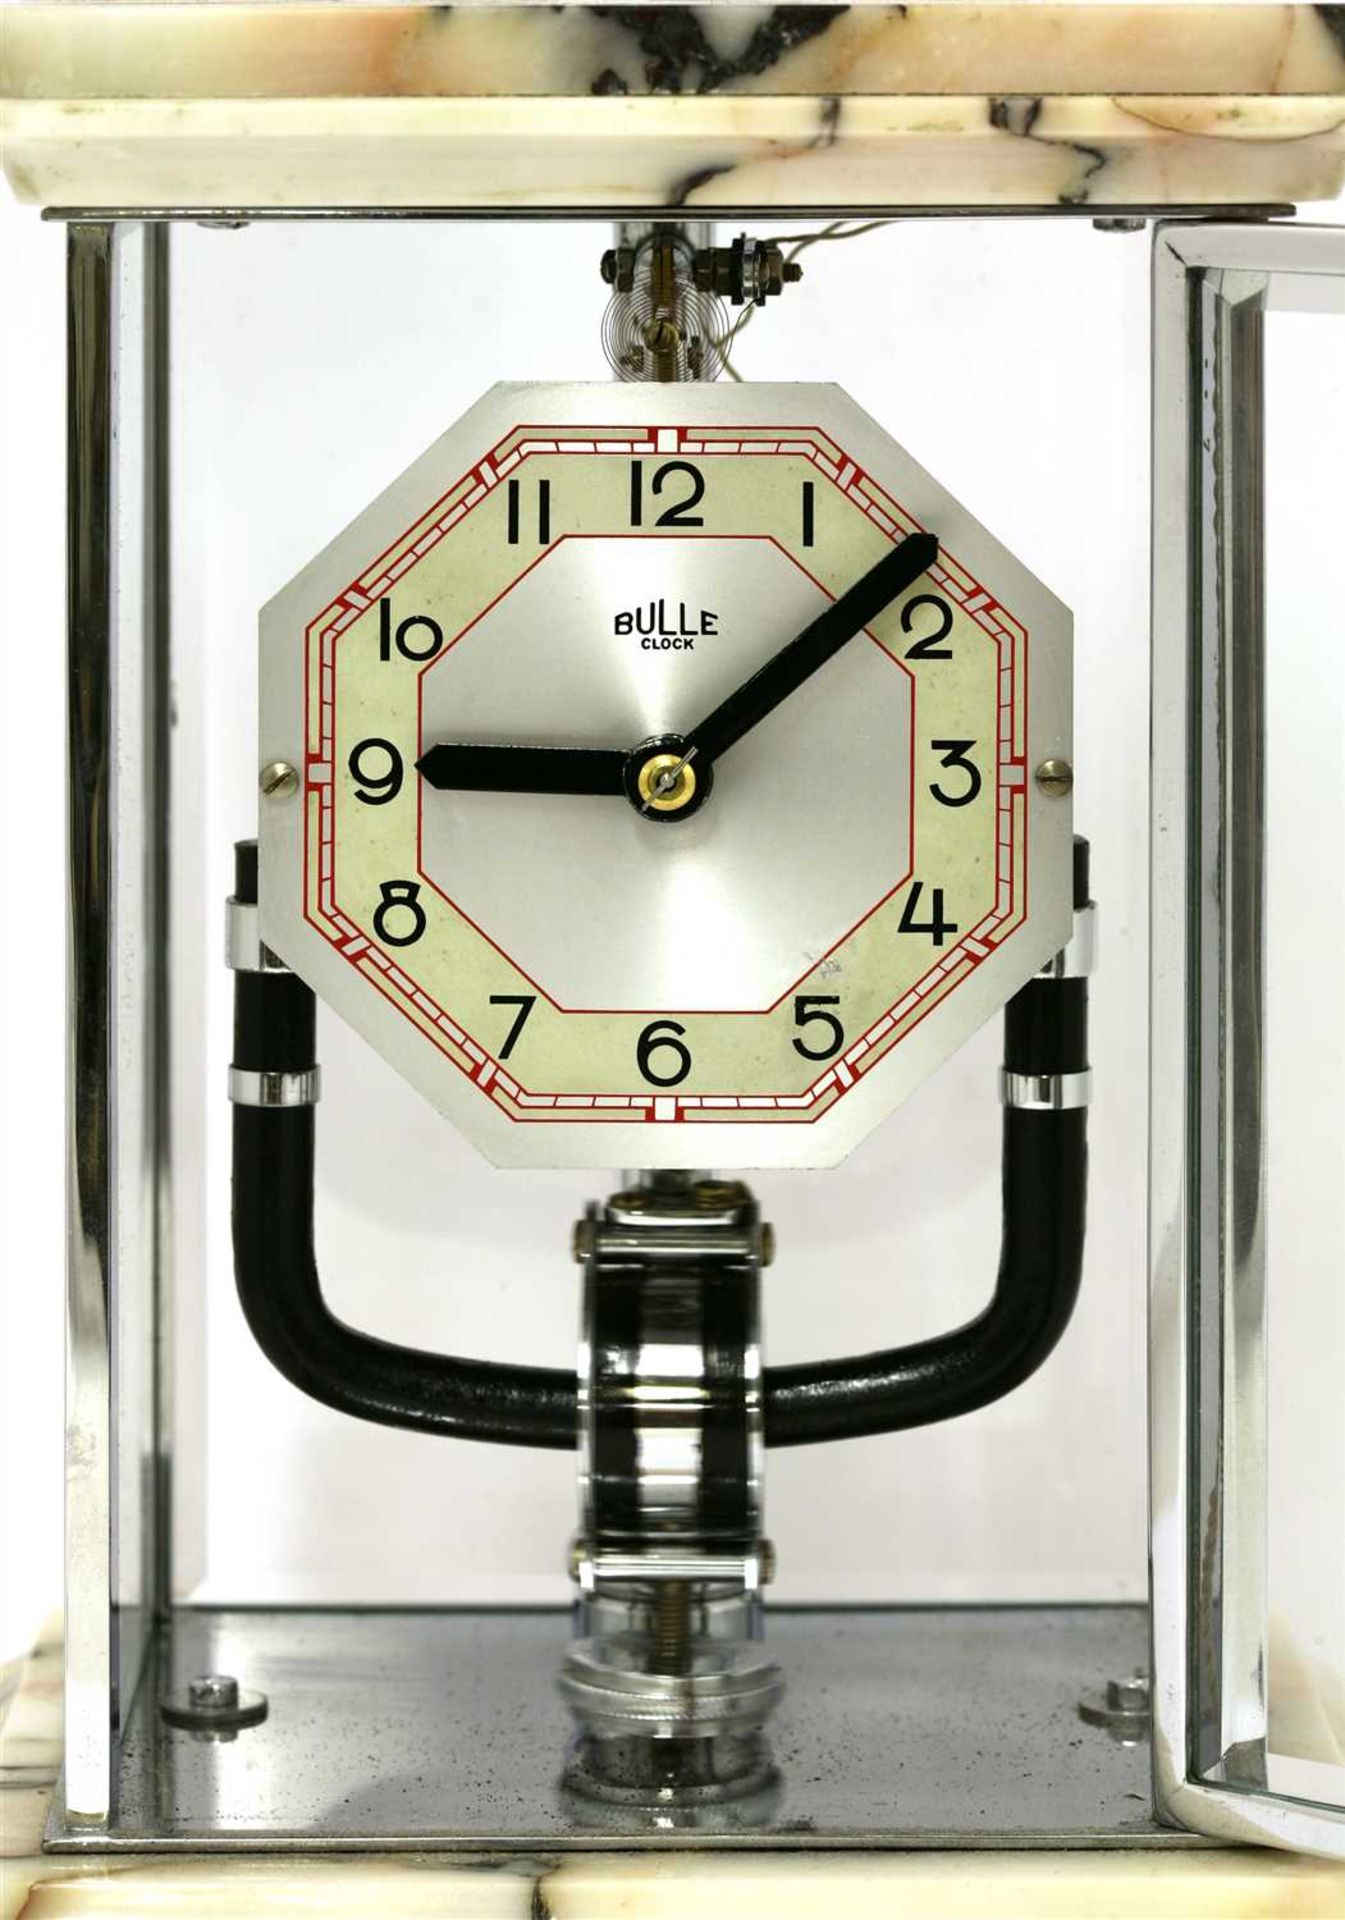 A Bulle electric mantel clock, - Image 2 of 3